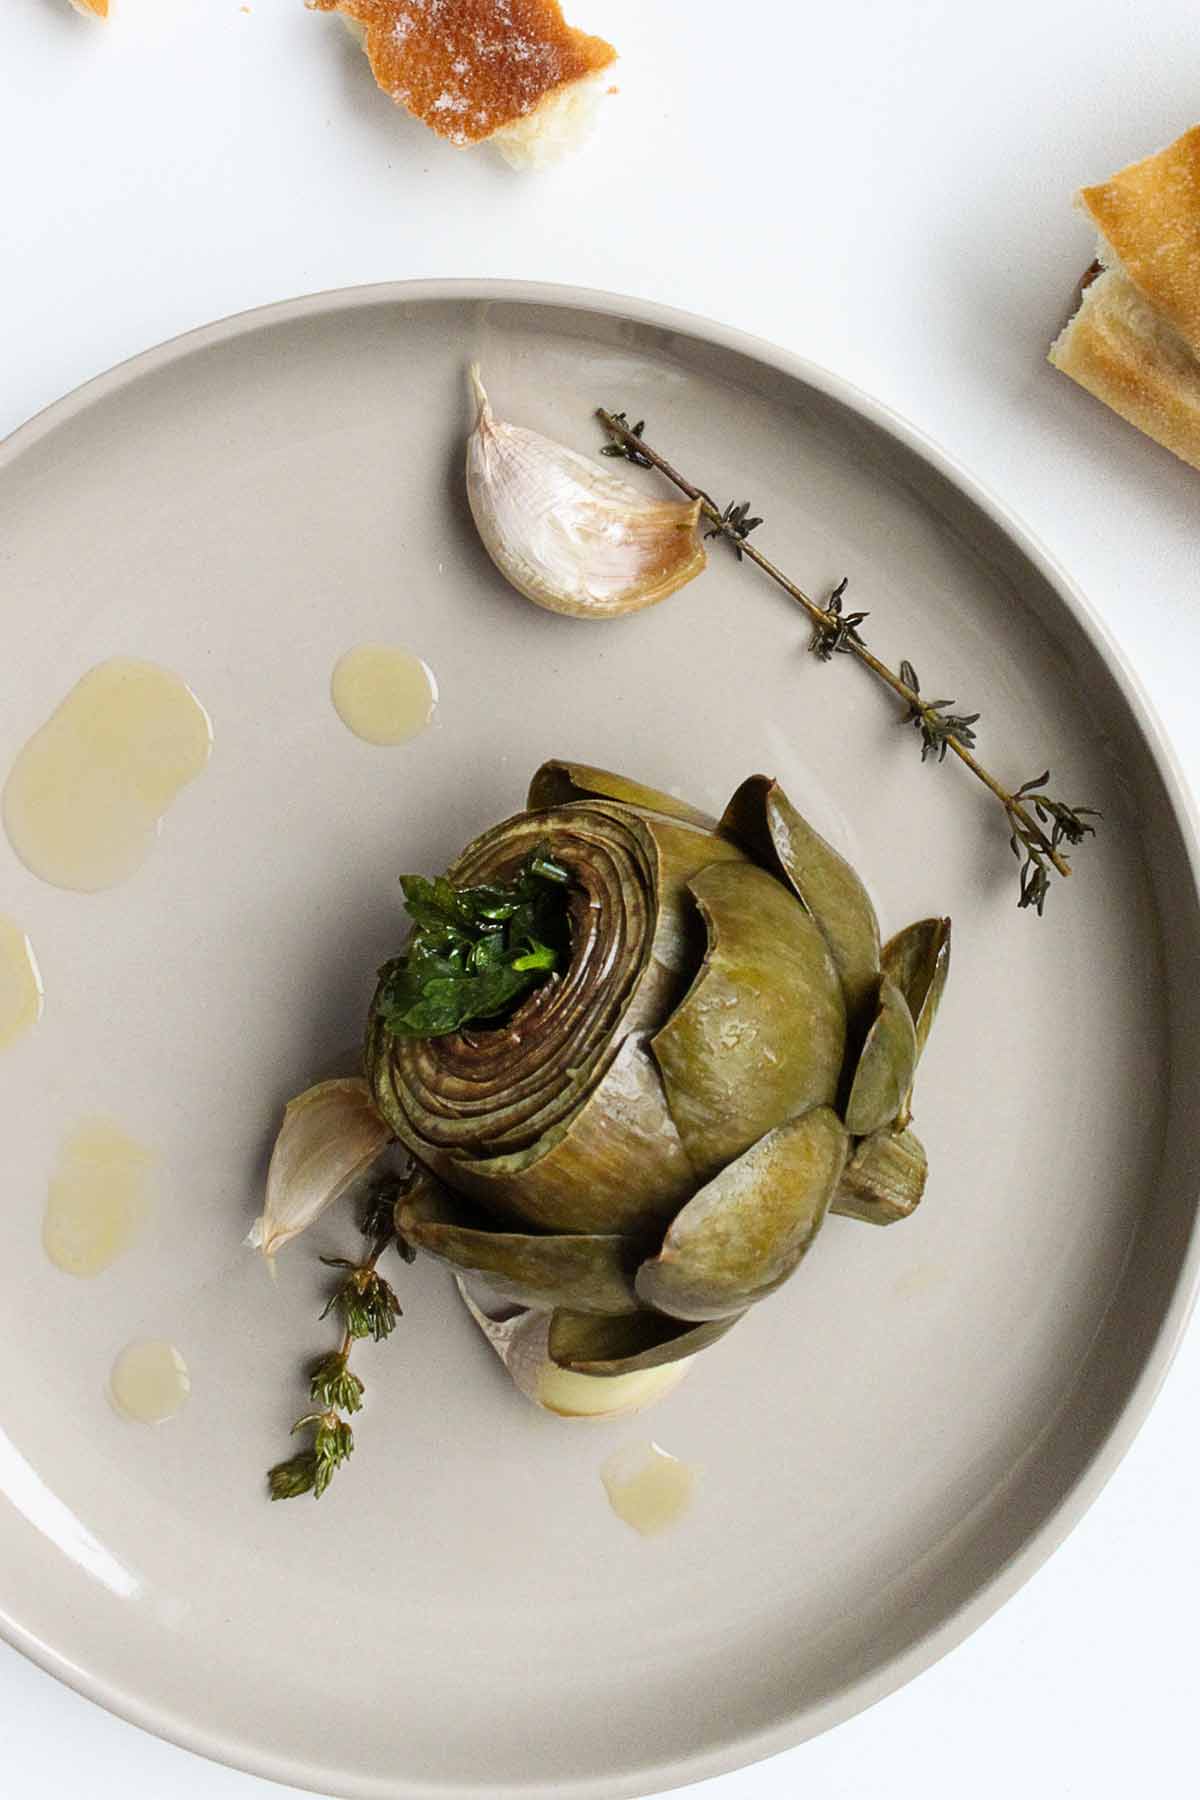 Braised artichokes on round plates with garlic and thyme sprigs and torn chunks of bread on the side.